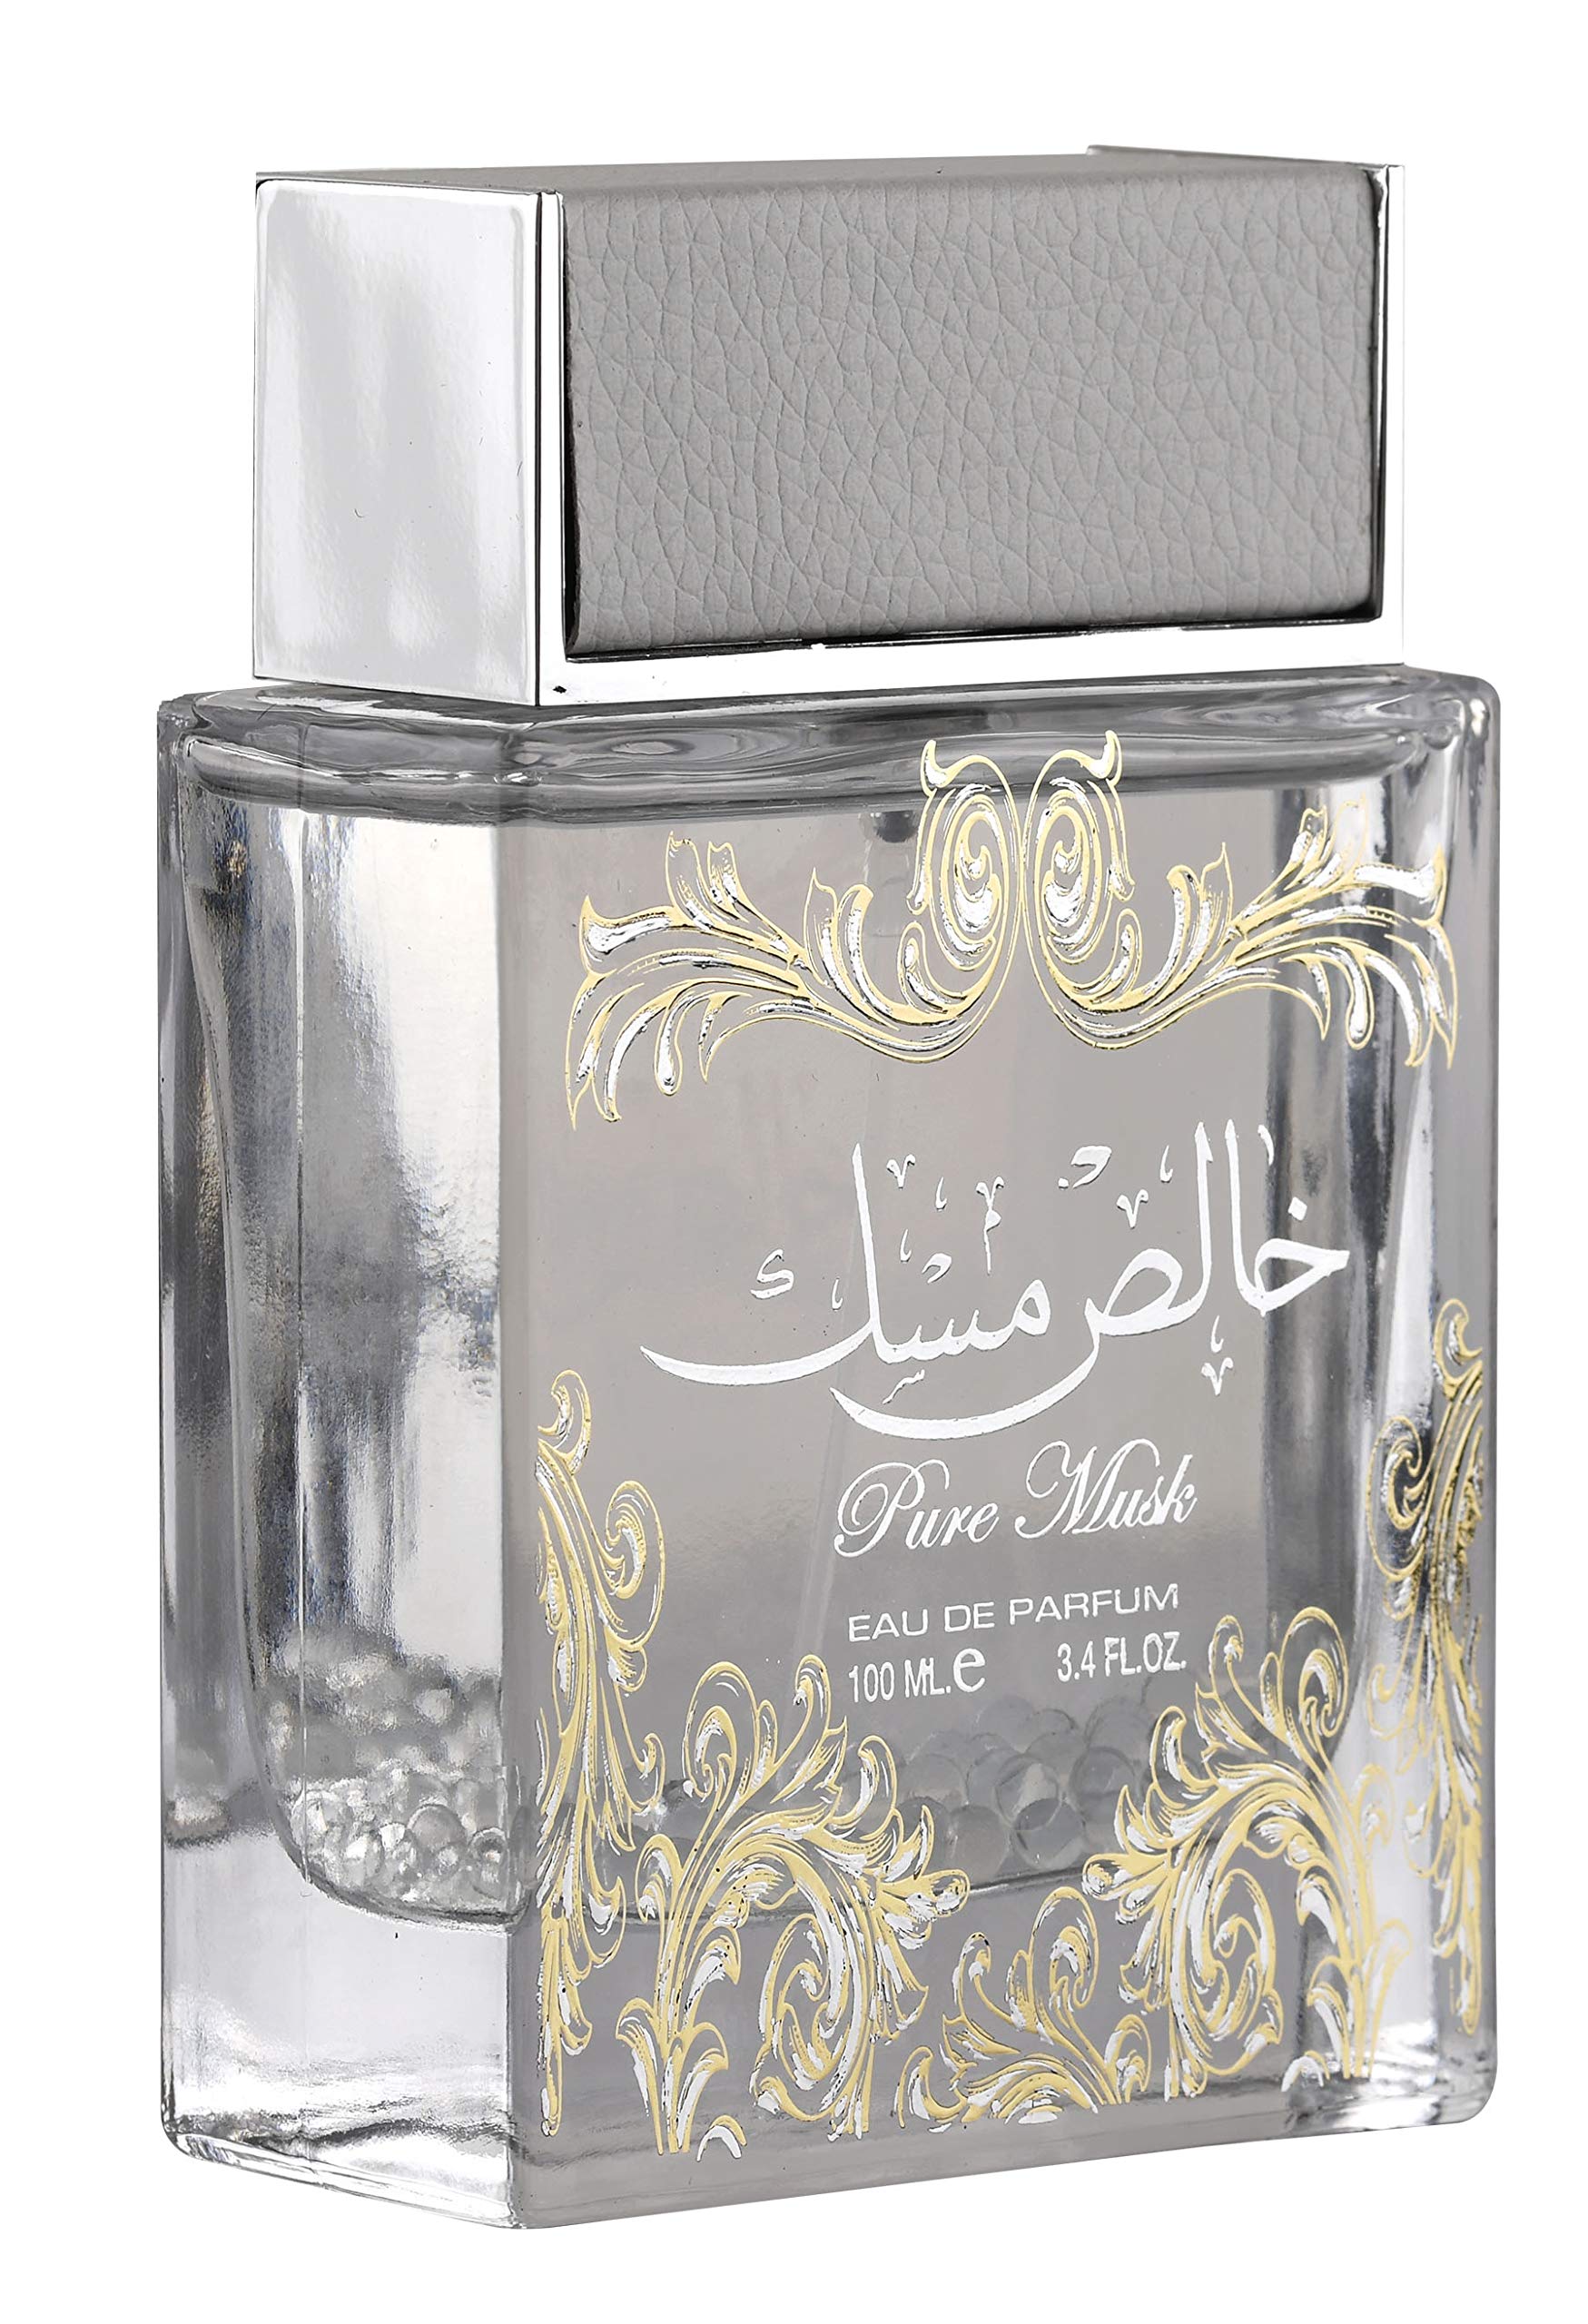 The image is of a square-shaped perfume bottle with the following features:  The bottle is made of clear glass, showcasing the transparent liquid inside. It has a broad, flat silver cap with a textured appearance resembling leather. Decorative golden flourishes adorn the front of the bottle, framing the text. The text on the bottle includes "Pure Musk" in a script font and Arabic calligraphy above it. Below the decorative elements, the bottle states "Eau de Parfum" and the volume "100 mL, 3.4 FL.OZ."